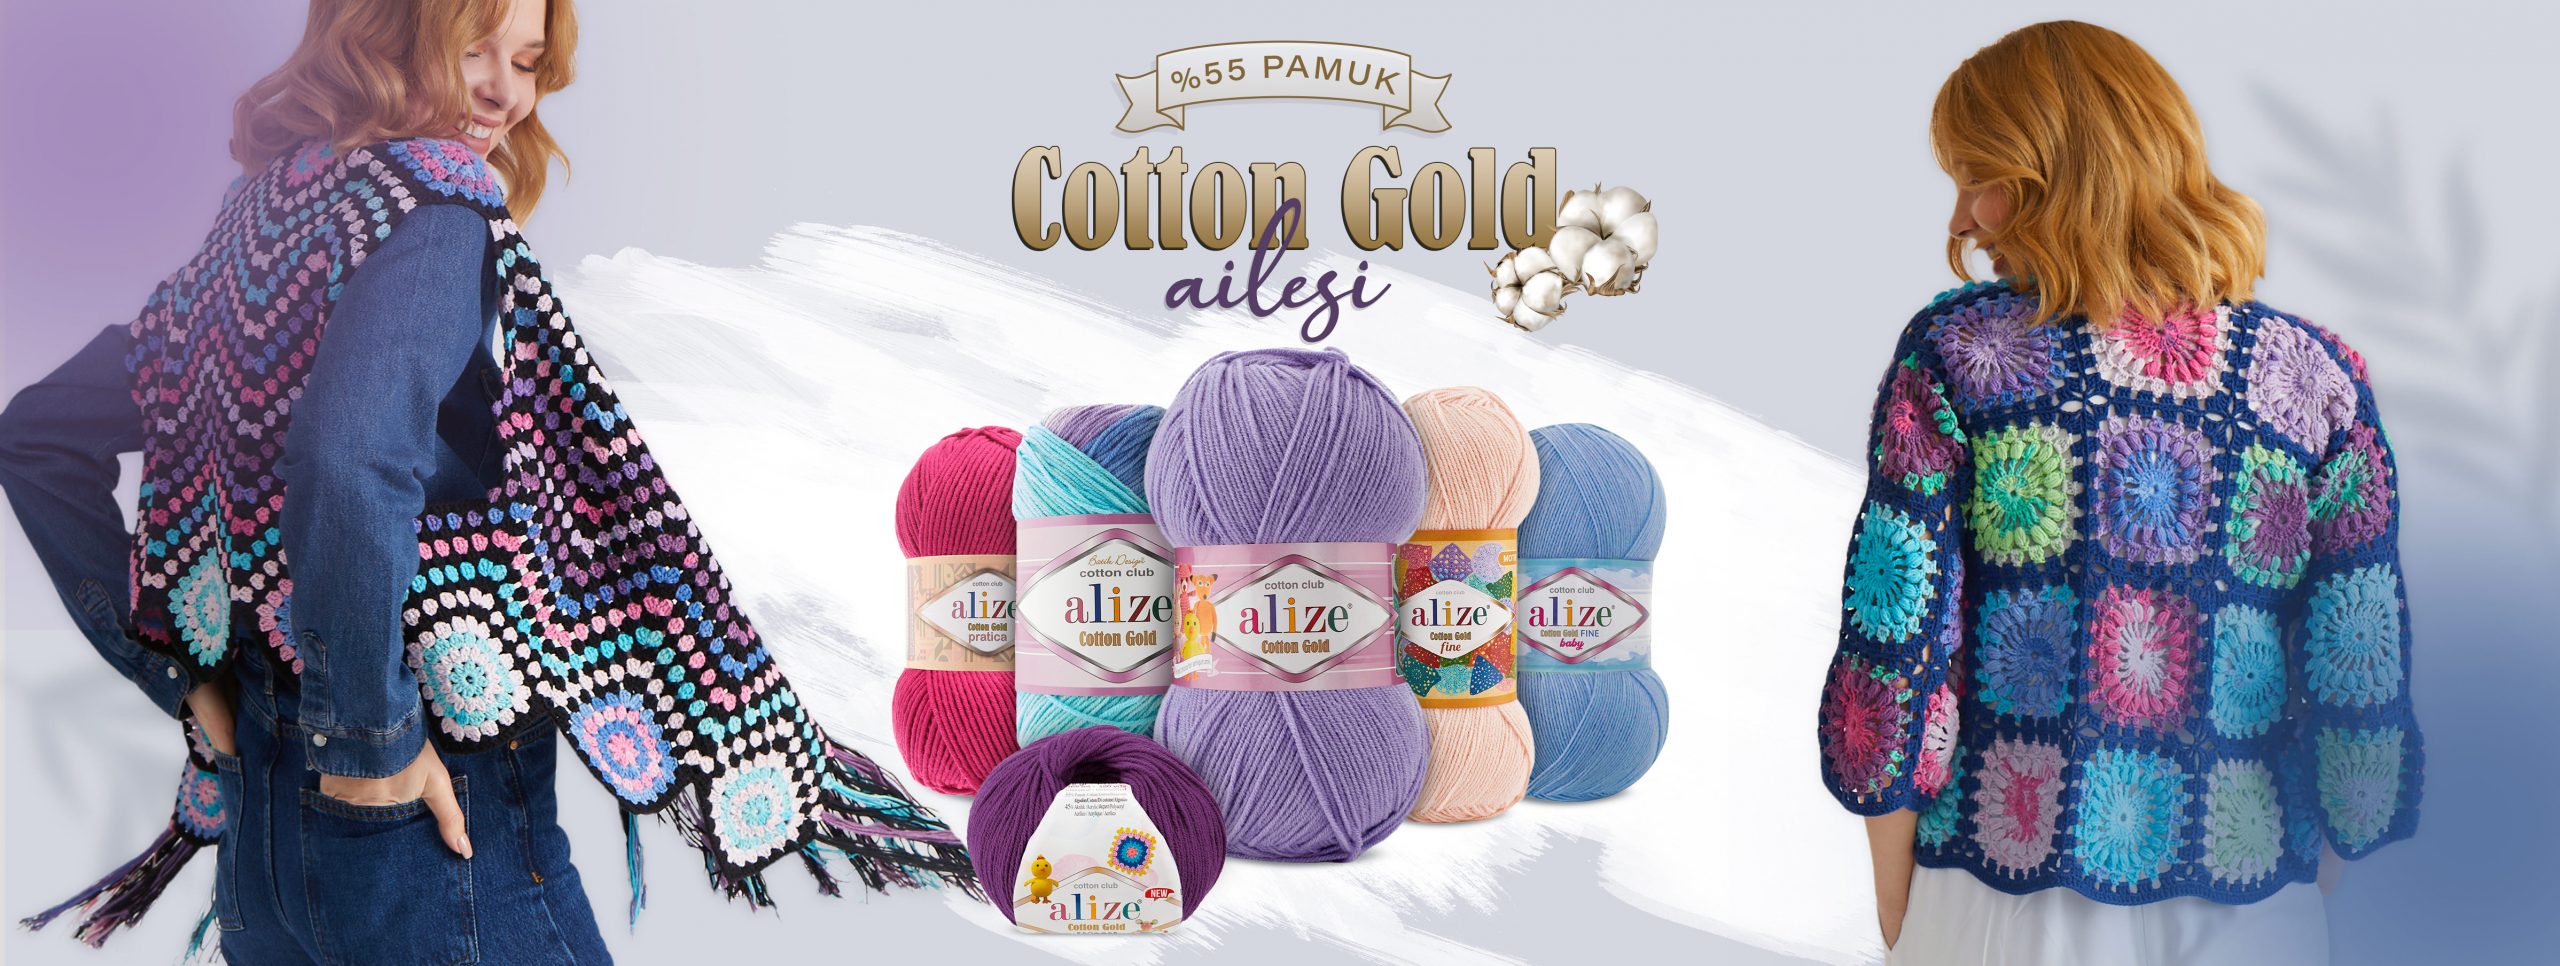 Alize Cotton Gold family